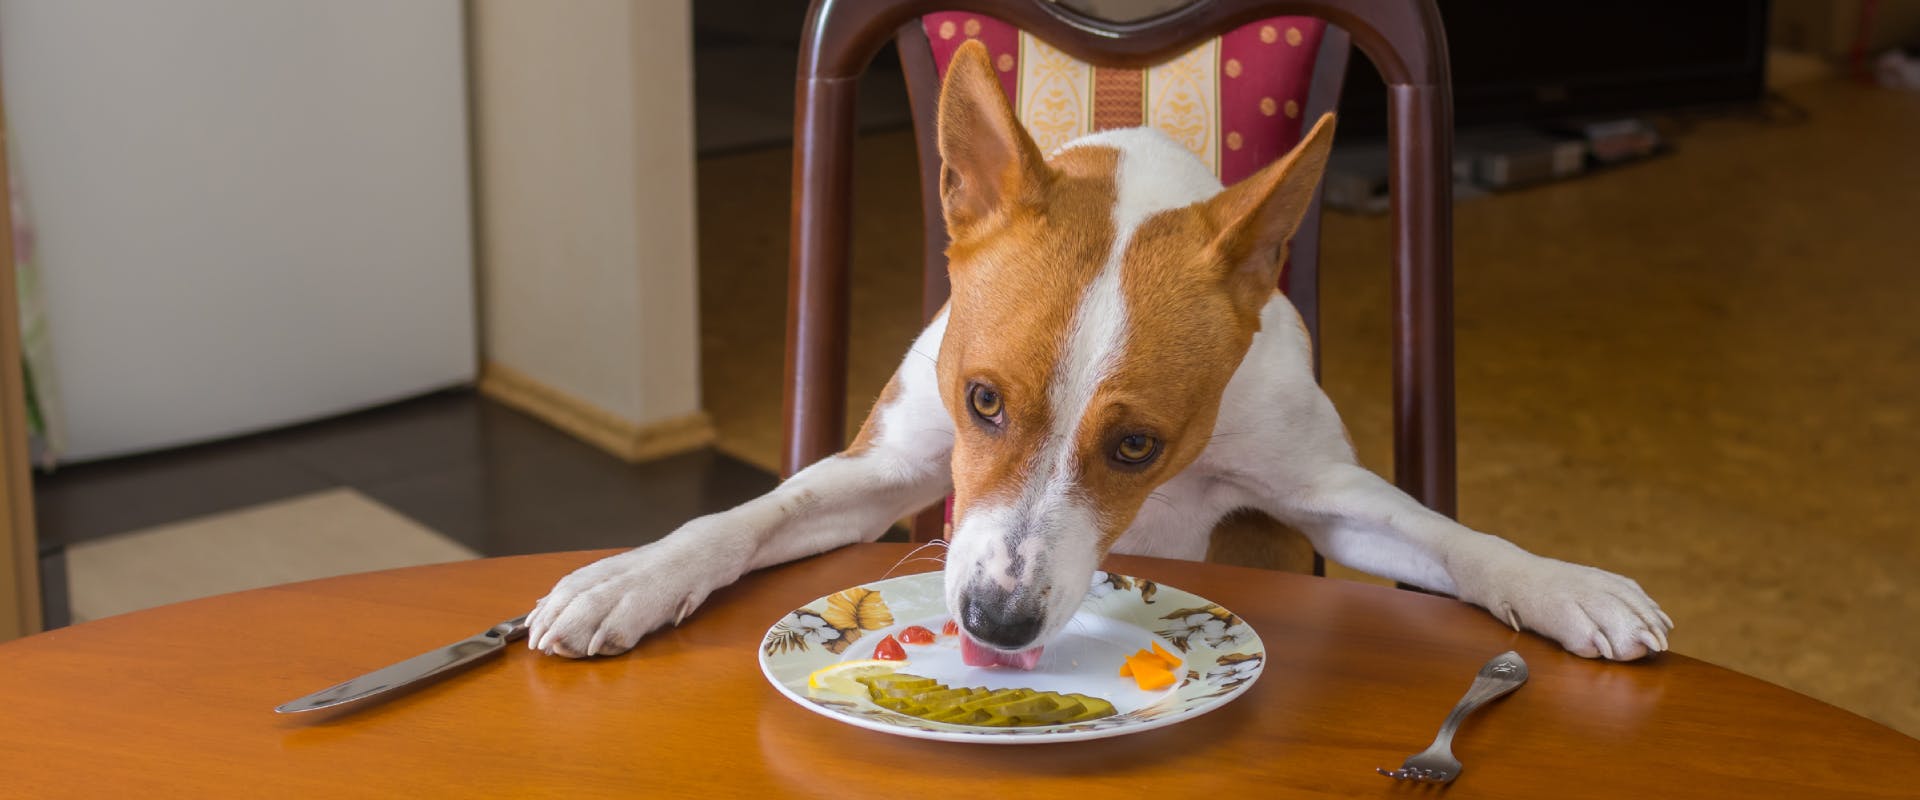 terrier sat on a chair with its paw on a kitchen table licking a plate